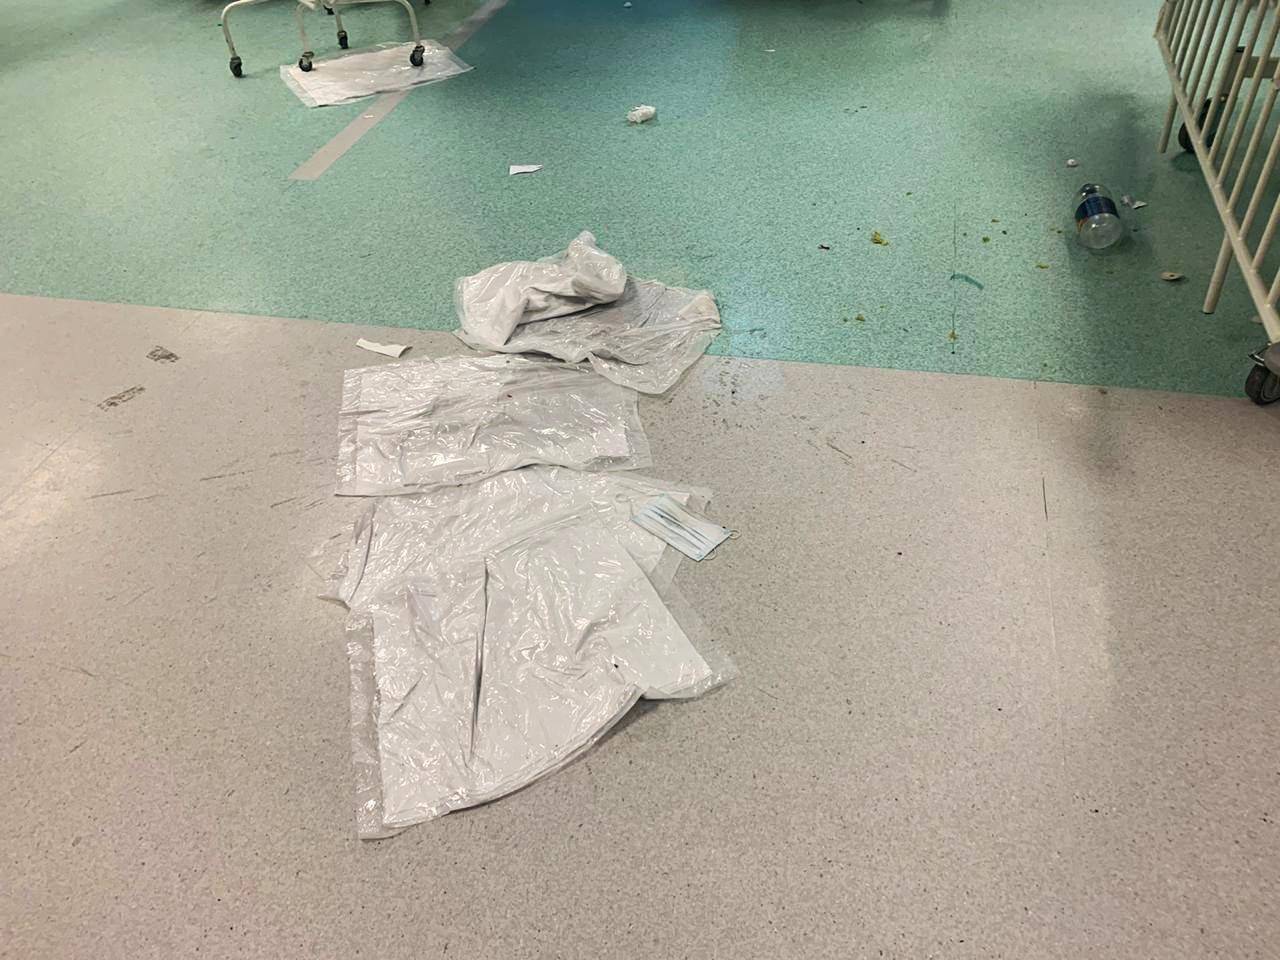  Dirt lying all over the floors of the Livingstone hospital in Port Elizabeth Picture: Supplied